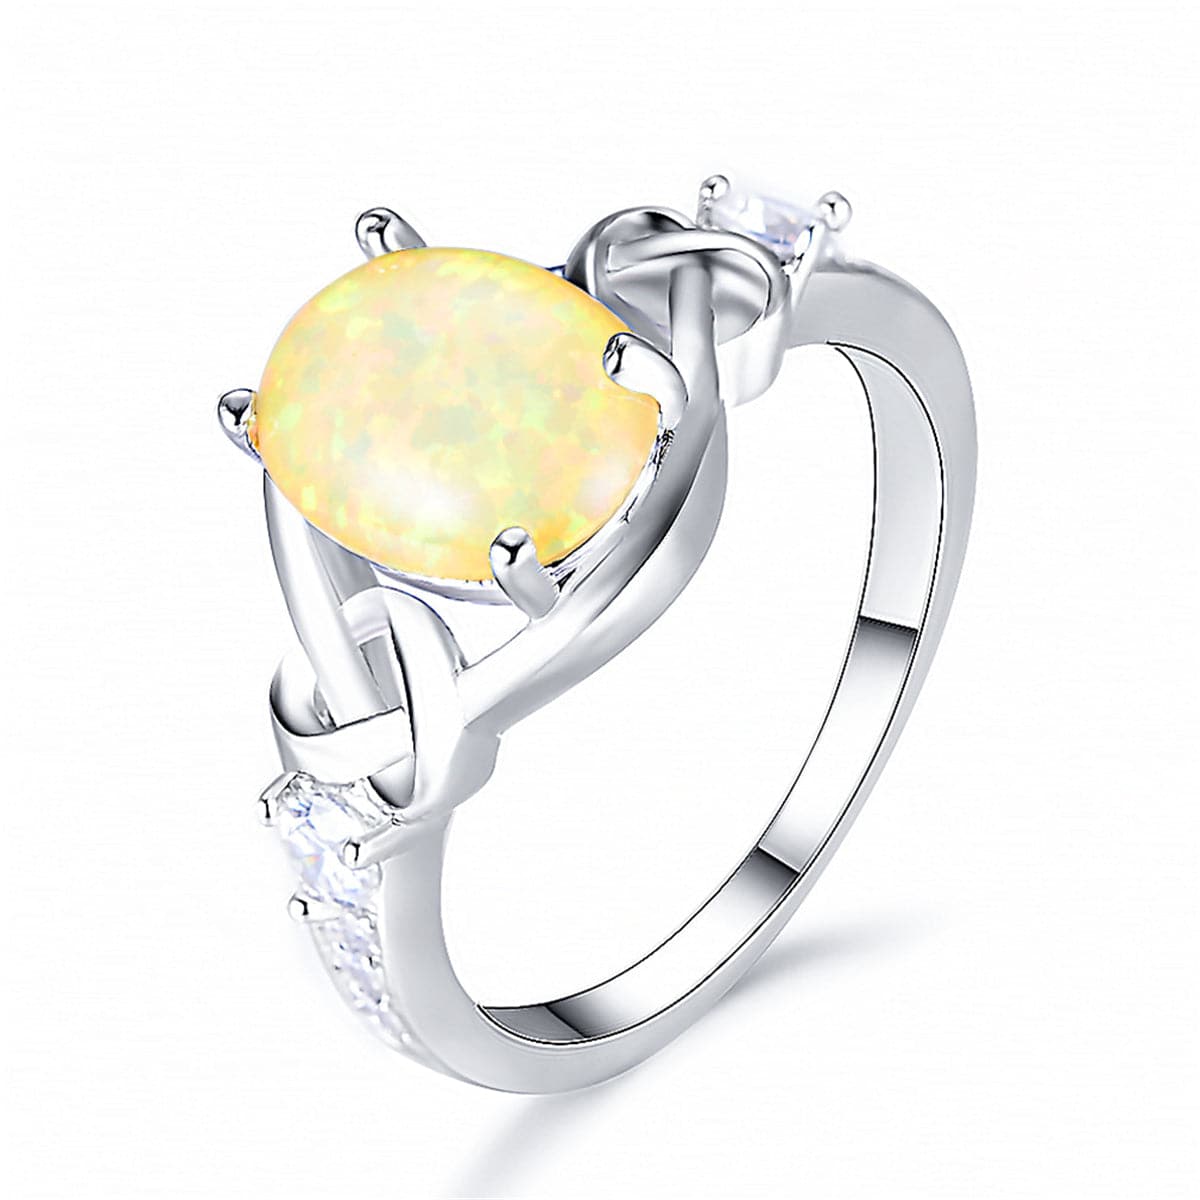 Yellow Opal & Silver-Plated Oval Ring